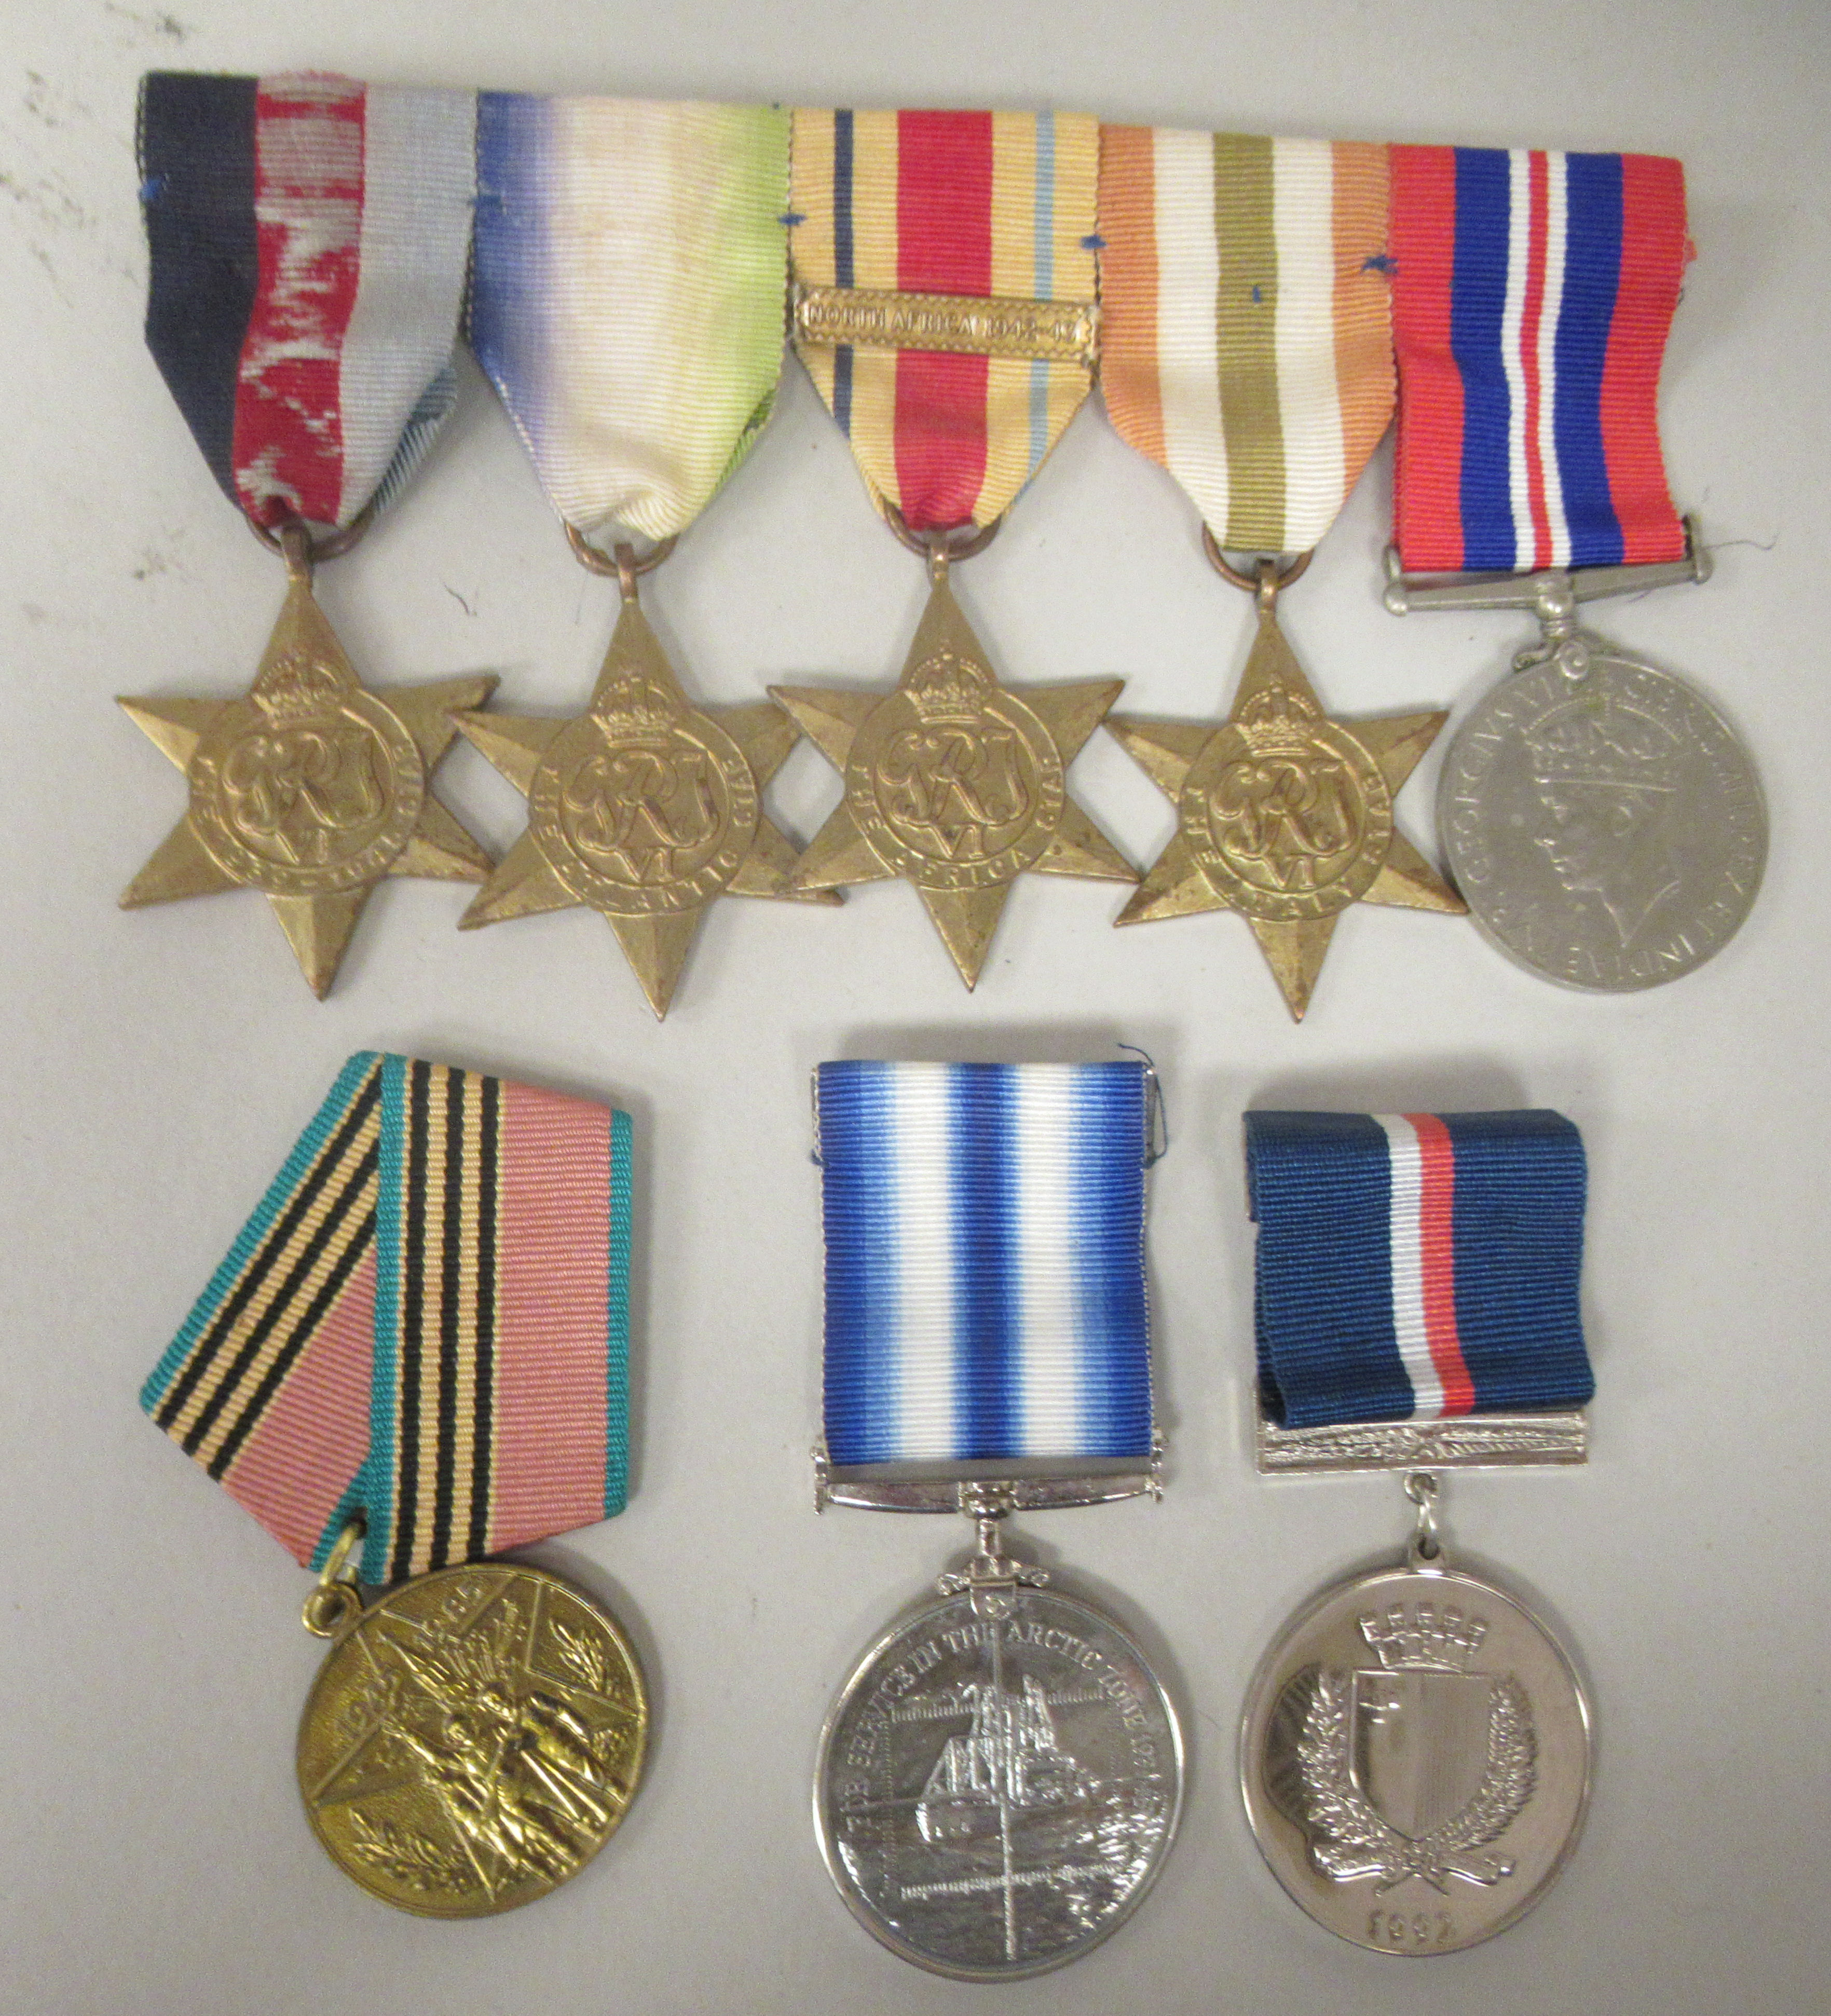 A 1939-1945 British War medal and ribbons; The 1939-1945 Star; The Atlantic Star; The Italy Star;